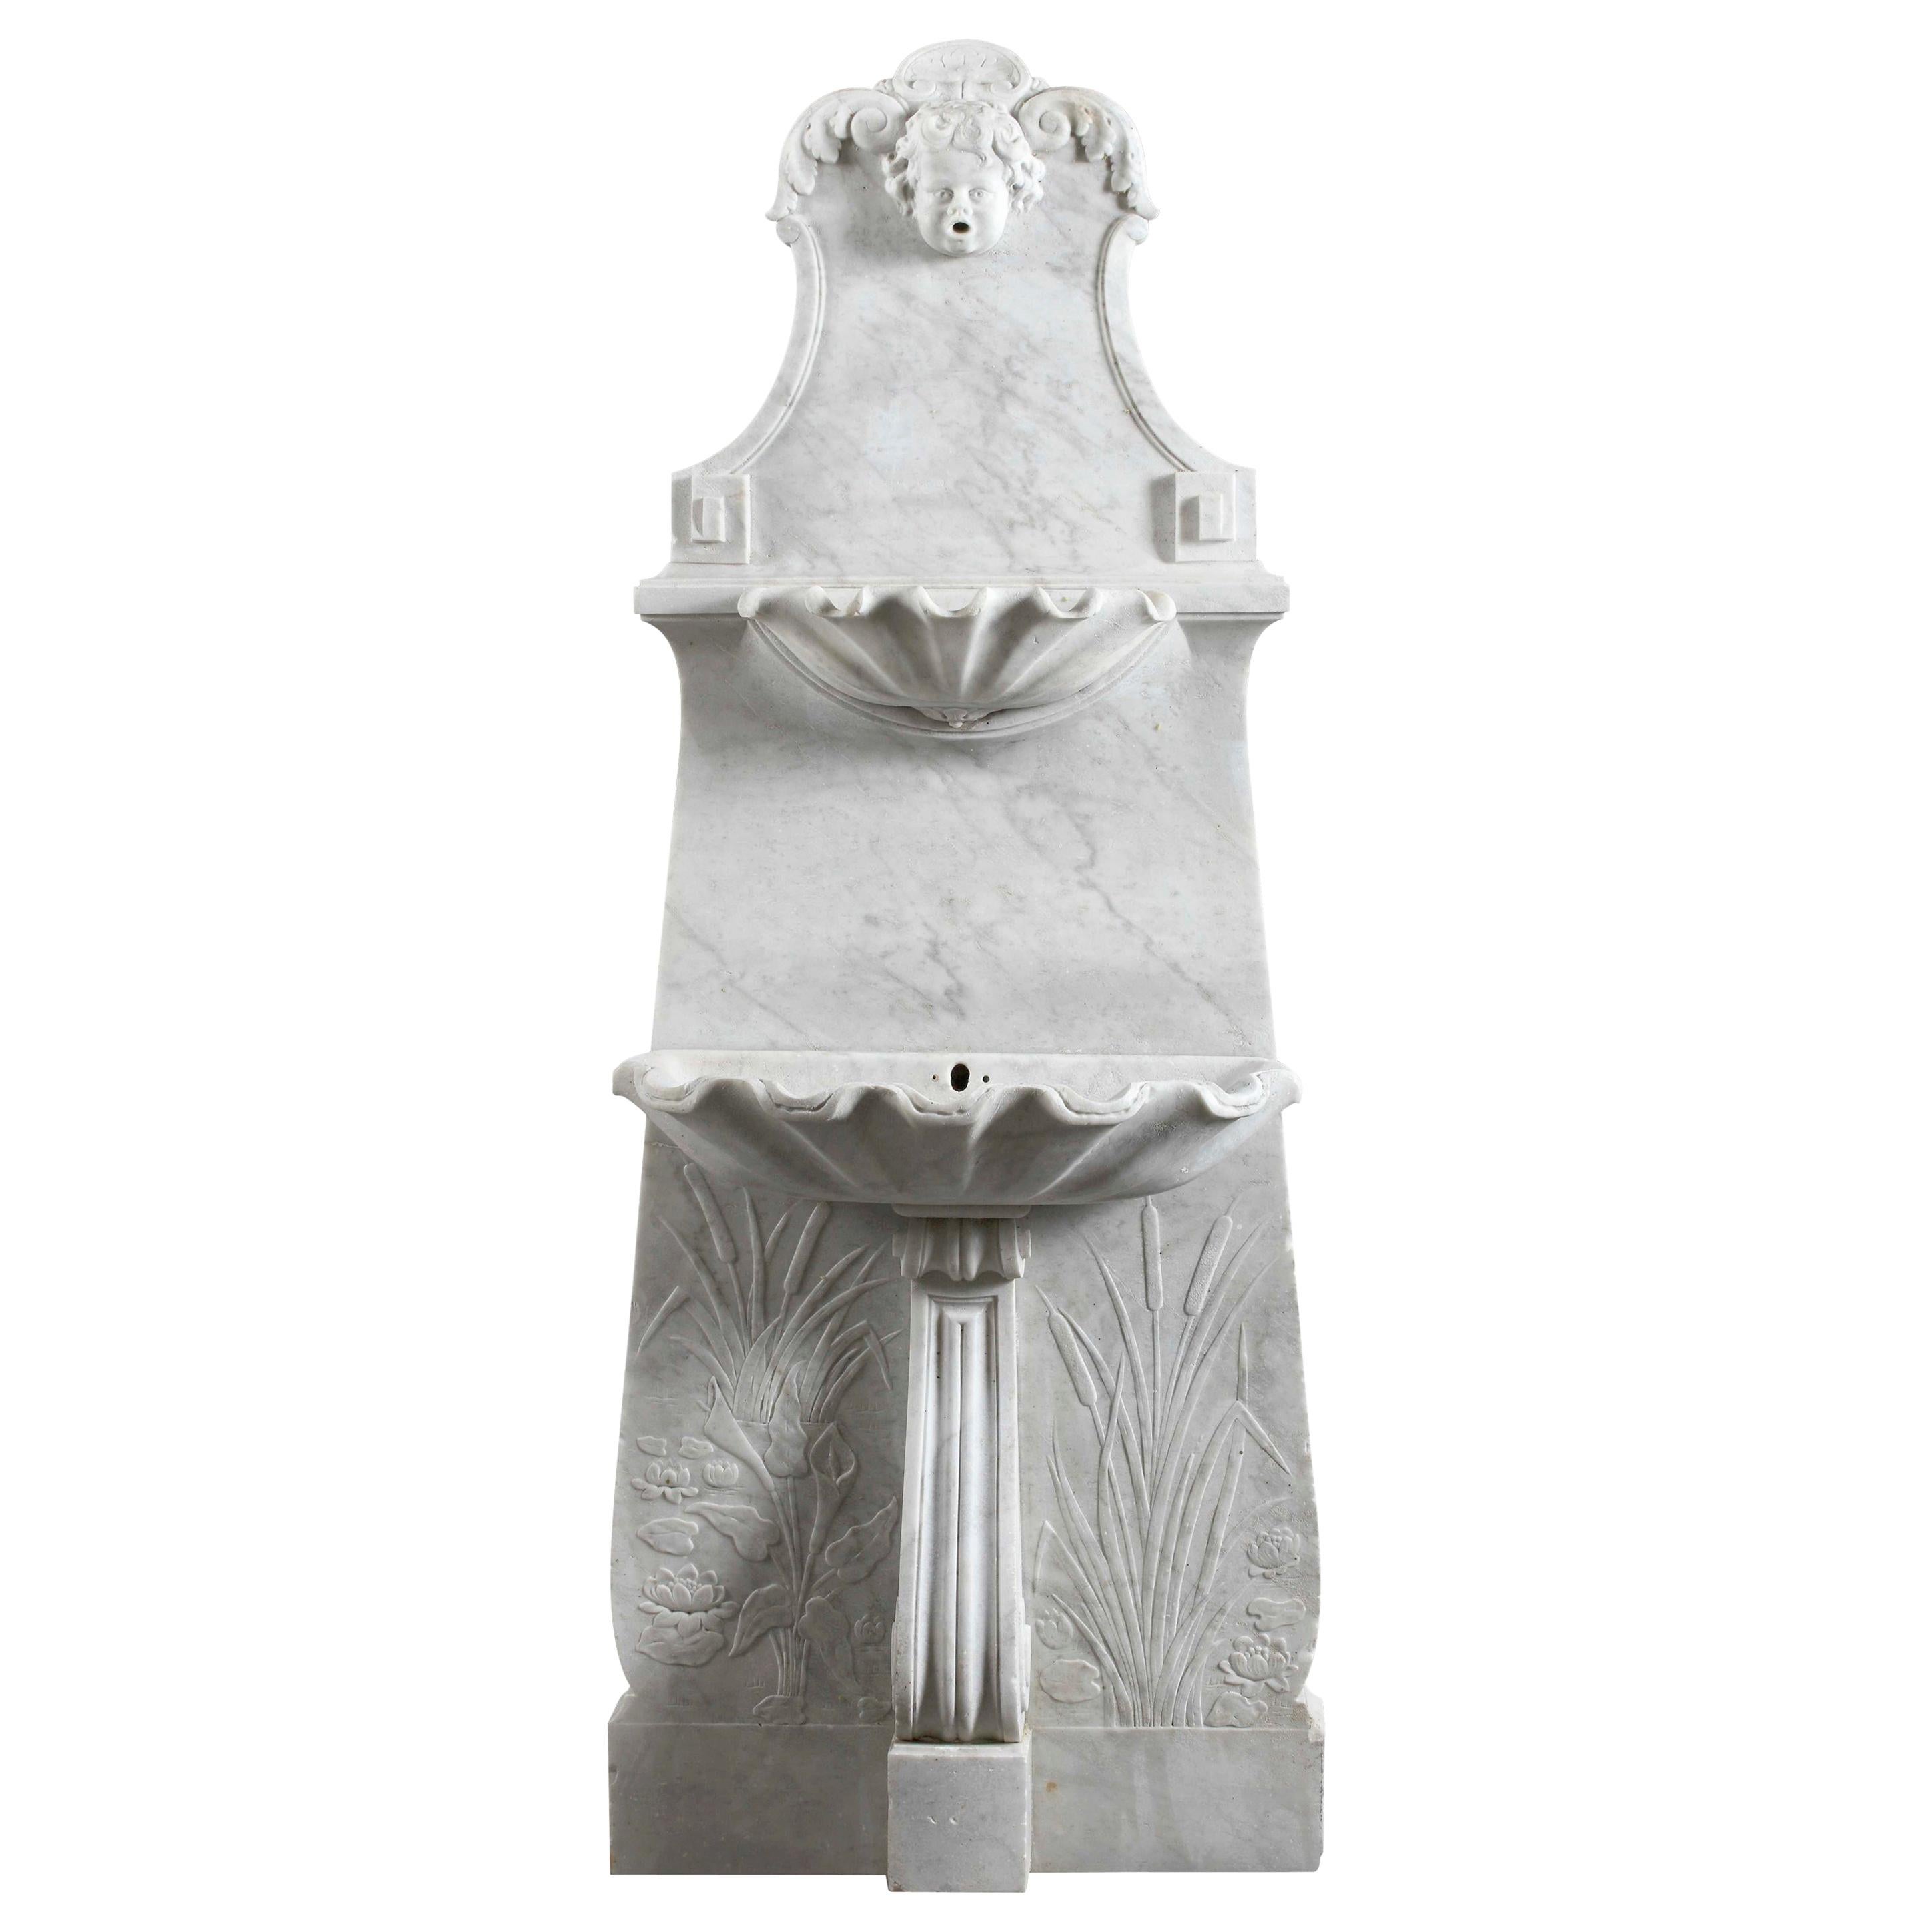 Decorative Antique Sculpted Marble Wall Fountain or Basin